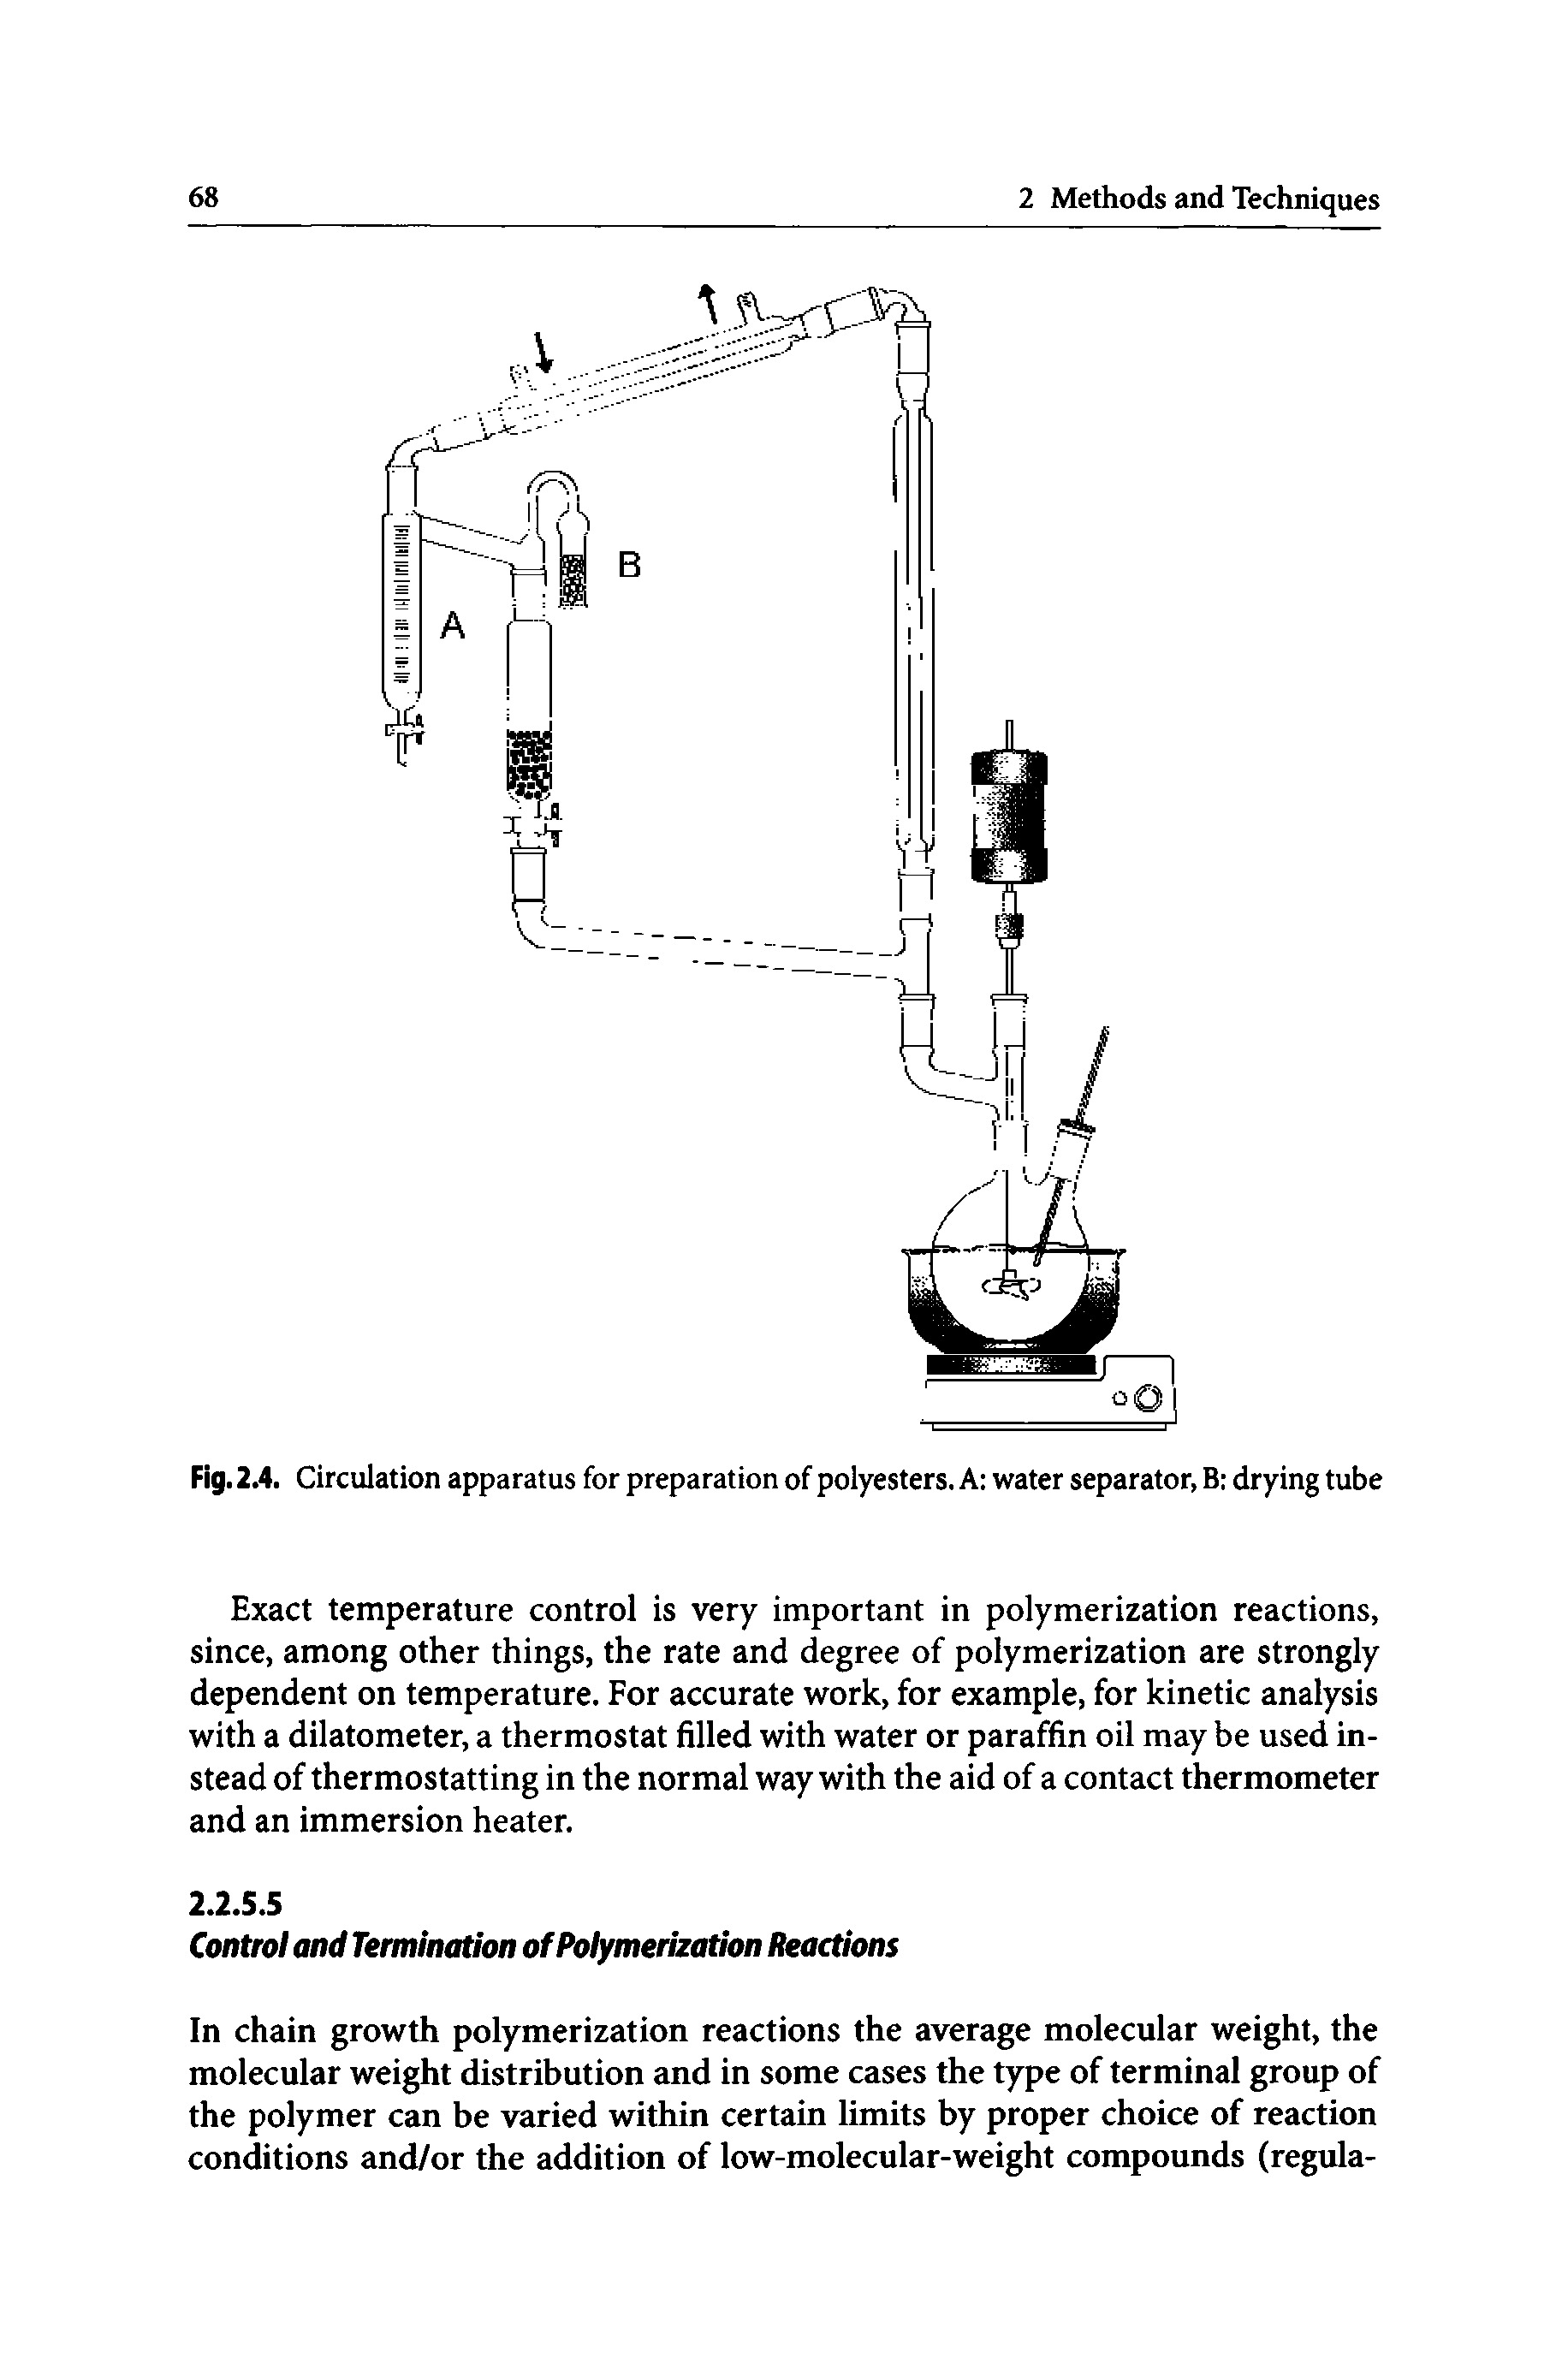 Fig. 2.4. Circulation apparatus for preparation of polyesters. A water separator, B drying tube...